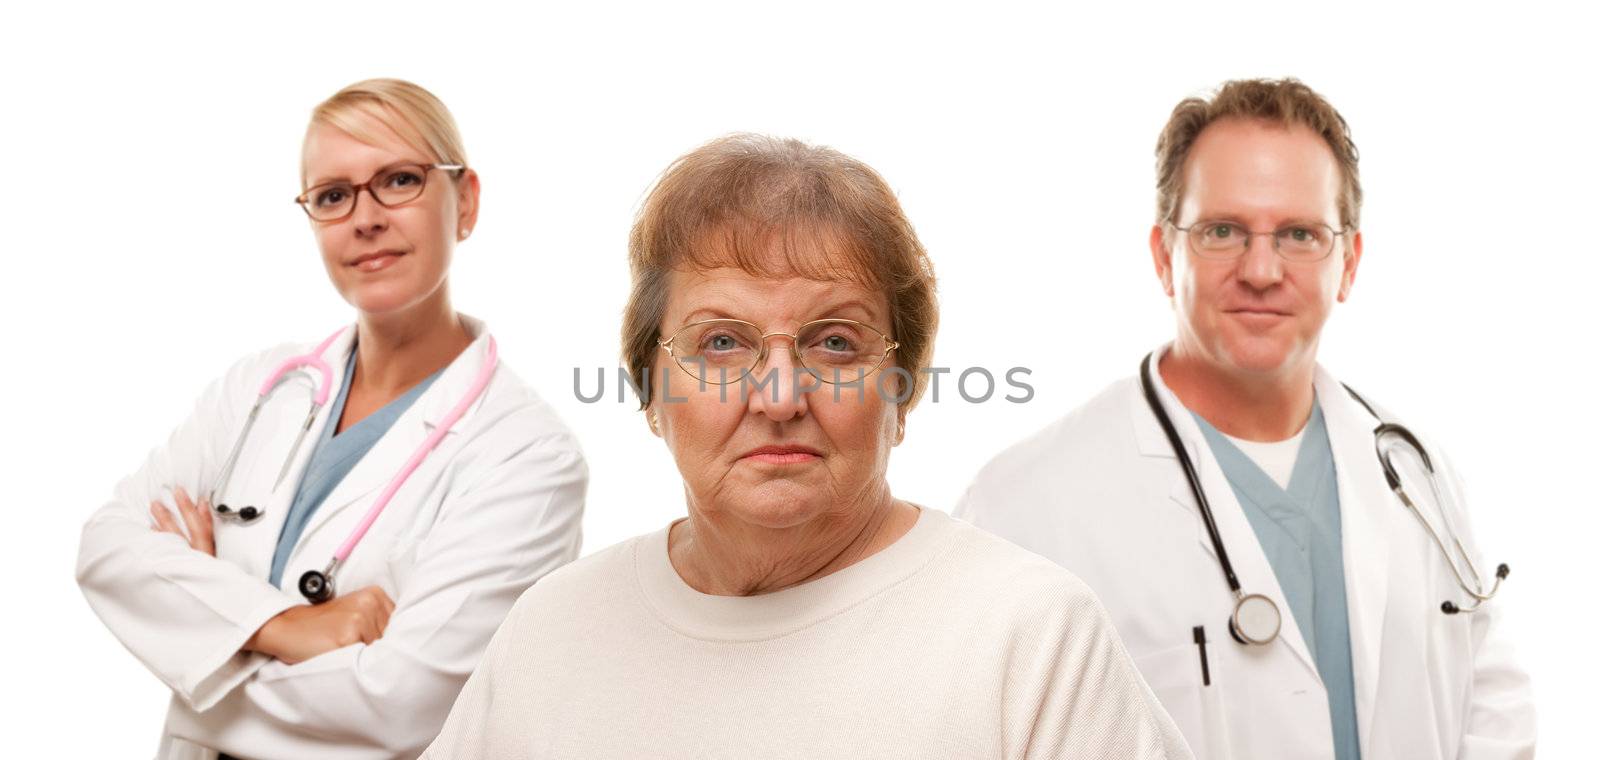 Concerned Senior Woman with Doctors Behind
 by Feverpitched